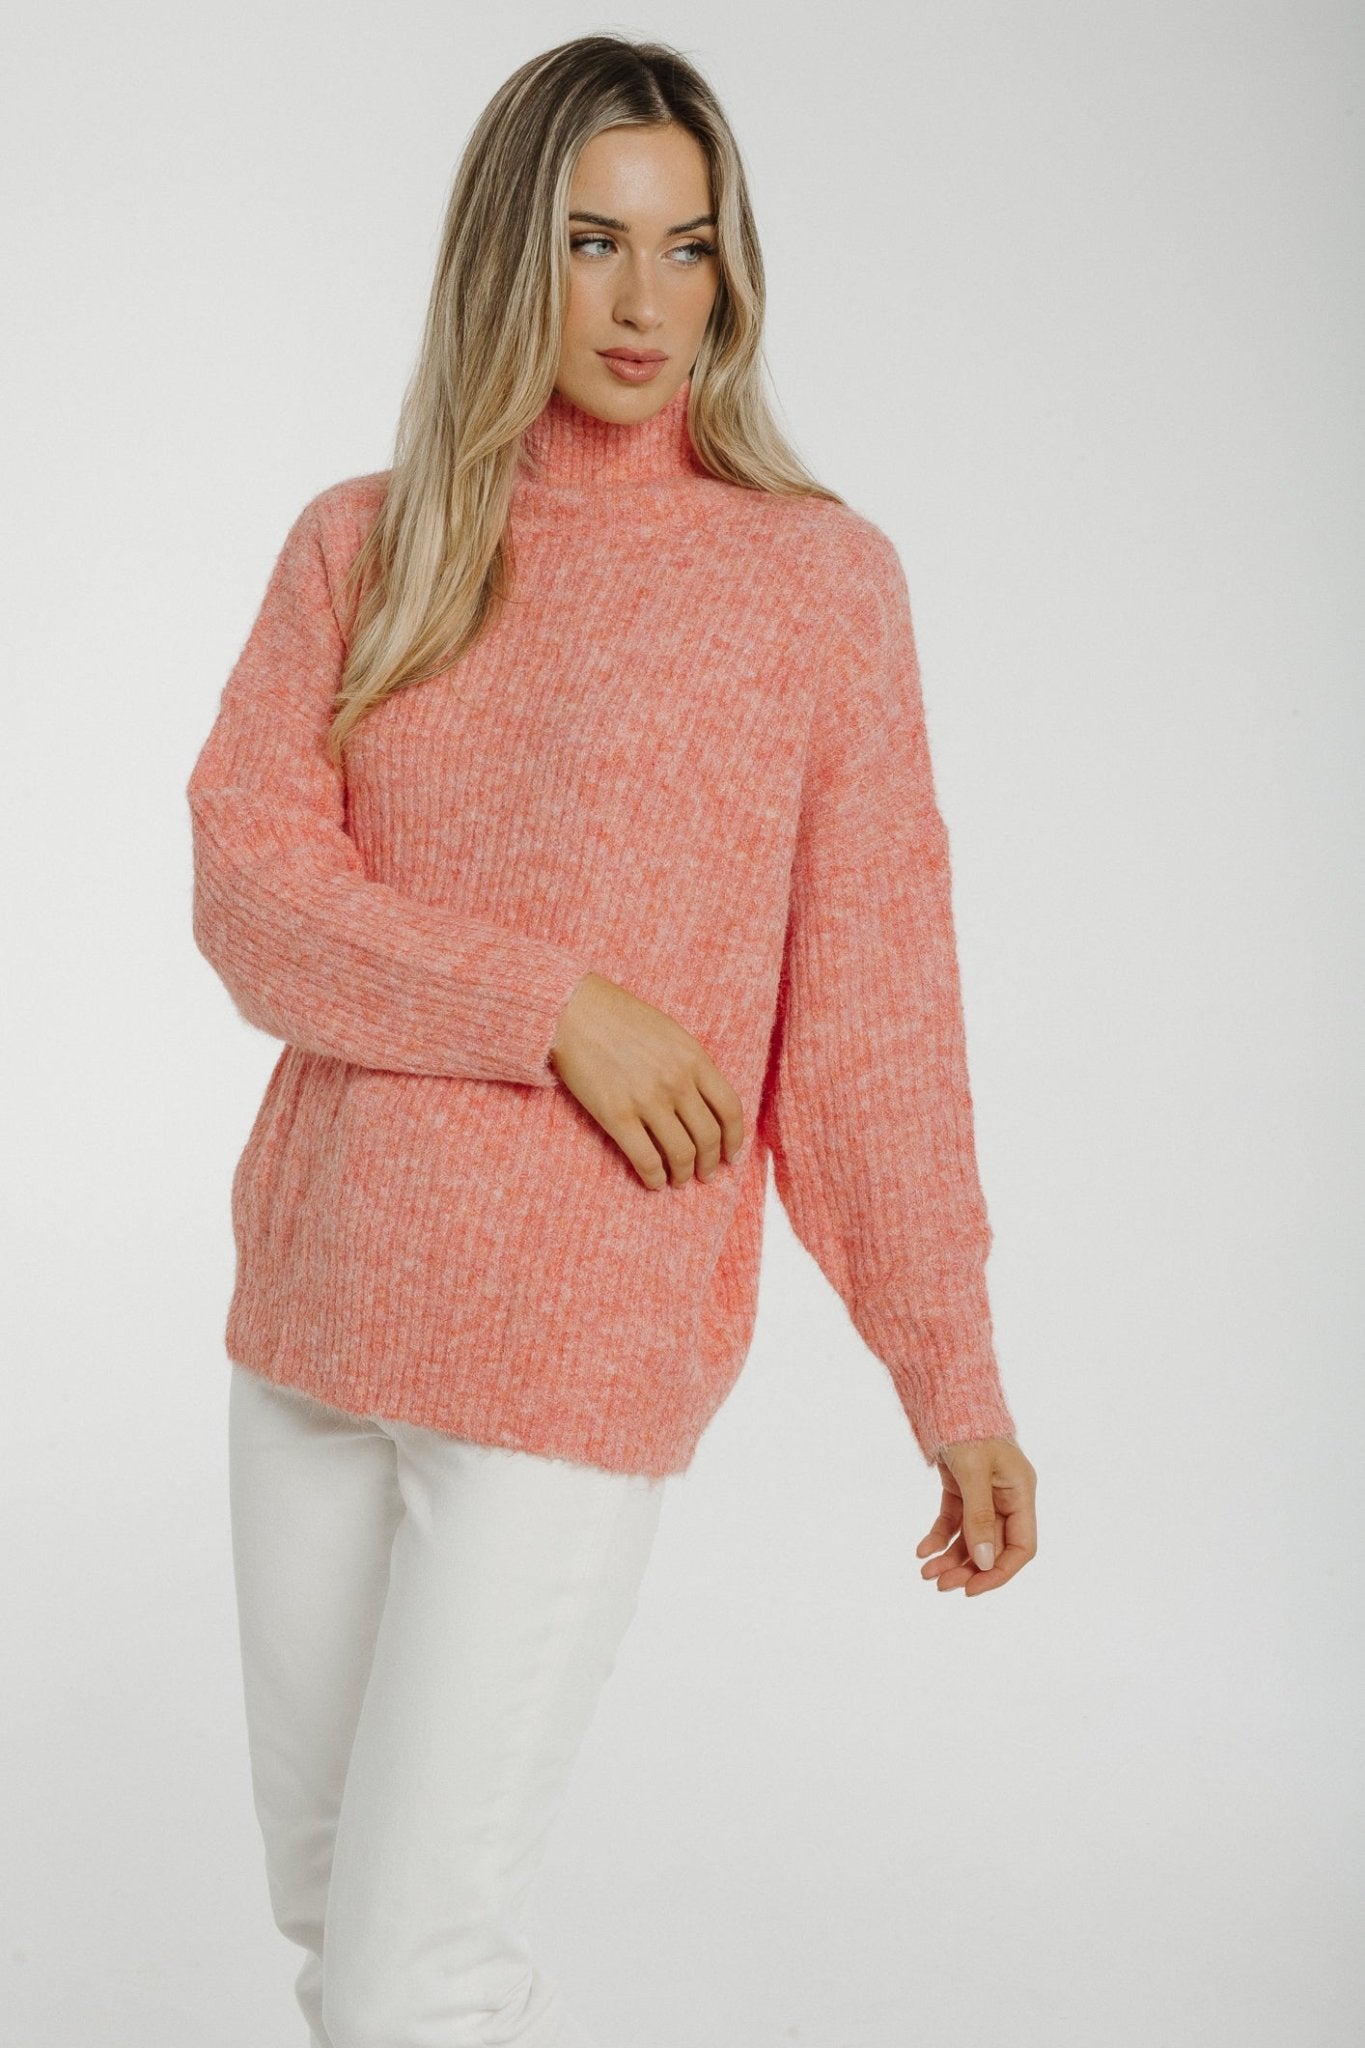 Sarah High Neck Ribbed Jumper In Pink - The Walk in Wardrobe